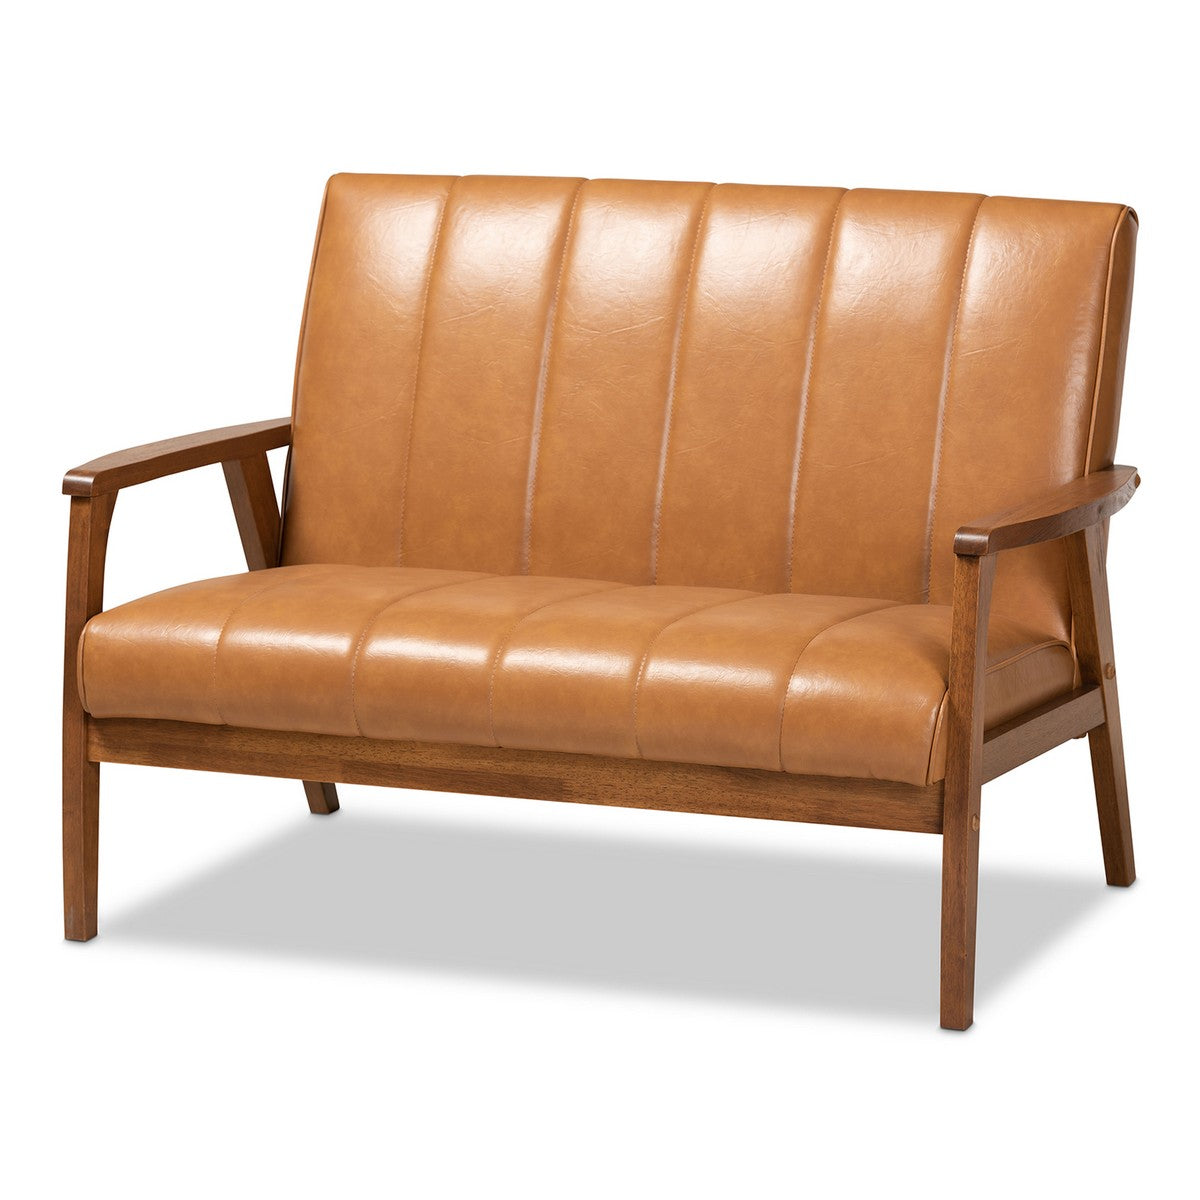 Baxton Studio Nikko Mid-century Modern Tan Faux Leather Upholstered and Walnut Brown finished Wood Loveseat Baxton Studio-loveseat-Minimal And Modern - 1